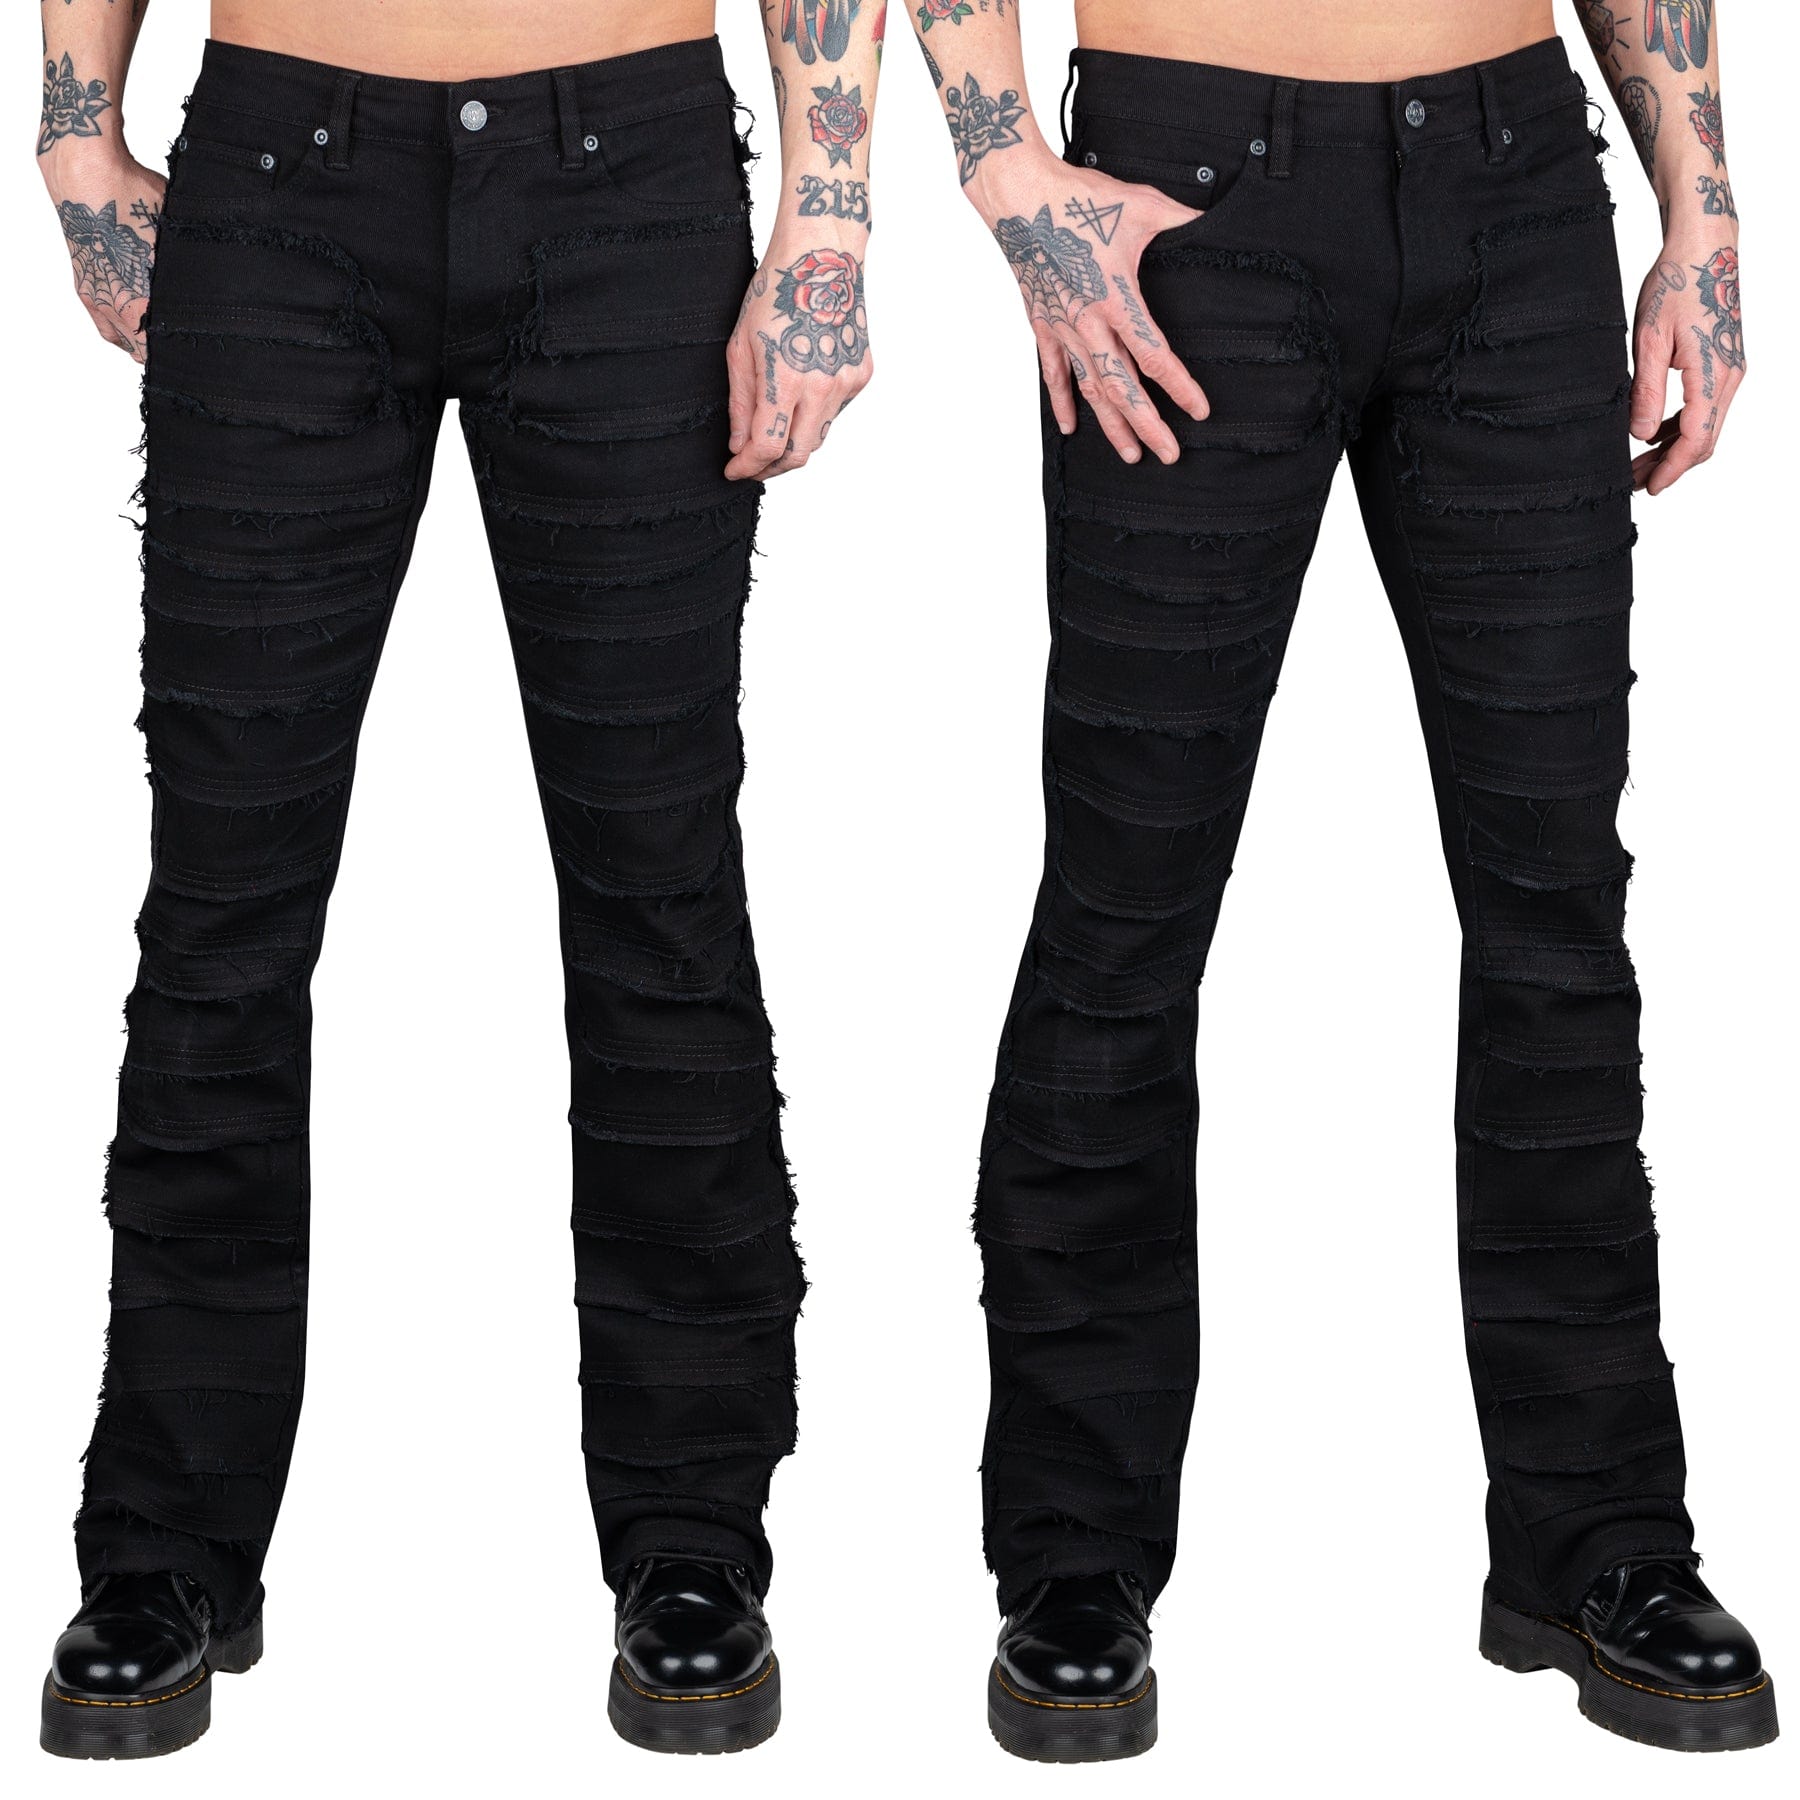 All Access Collection Pants Bandage Jeans - Black